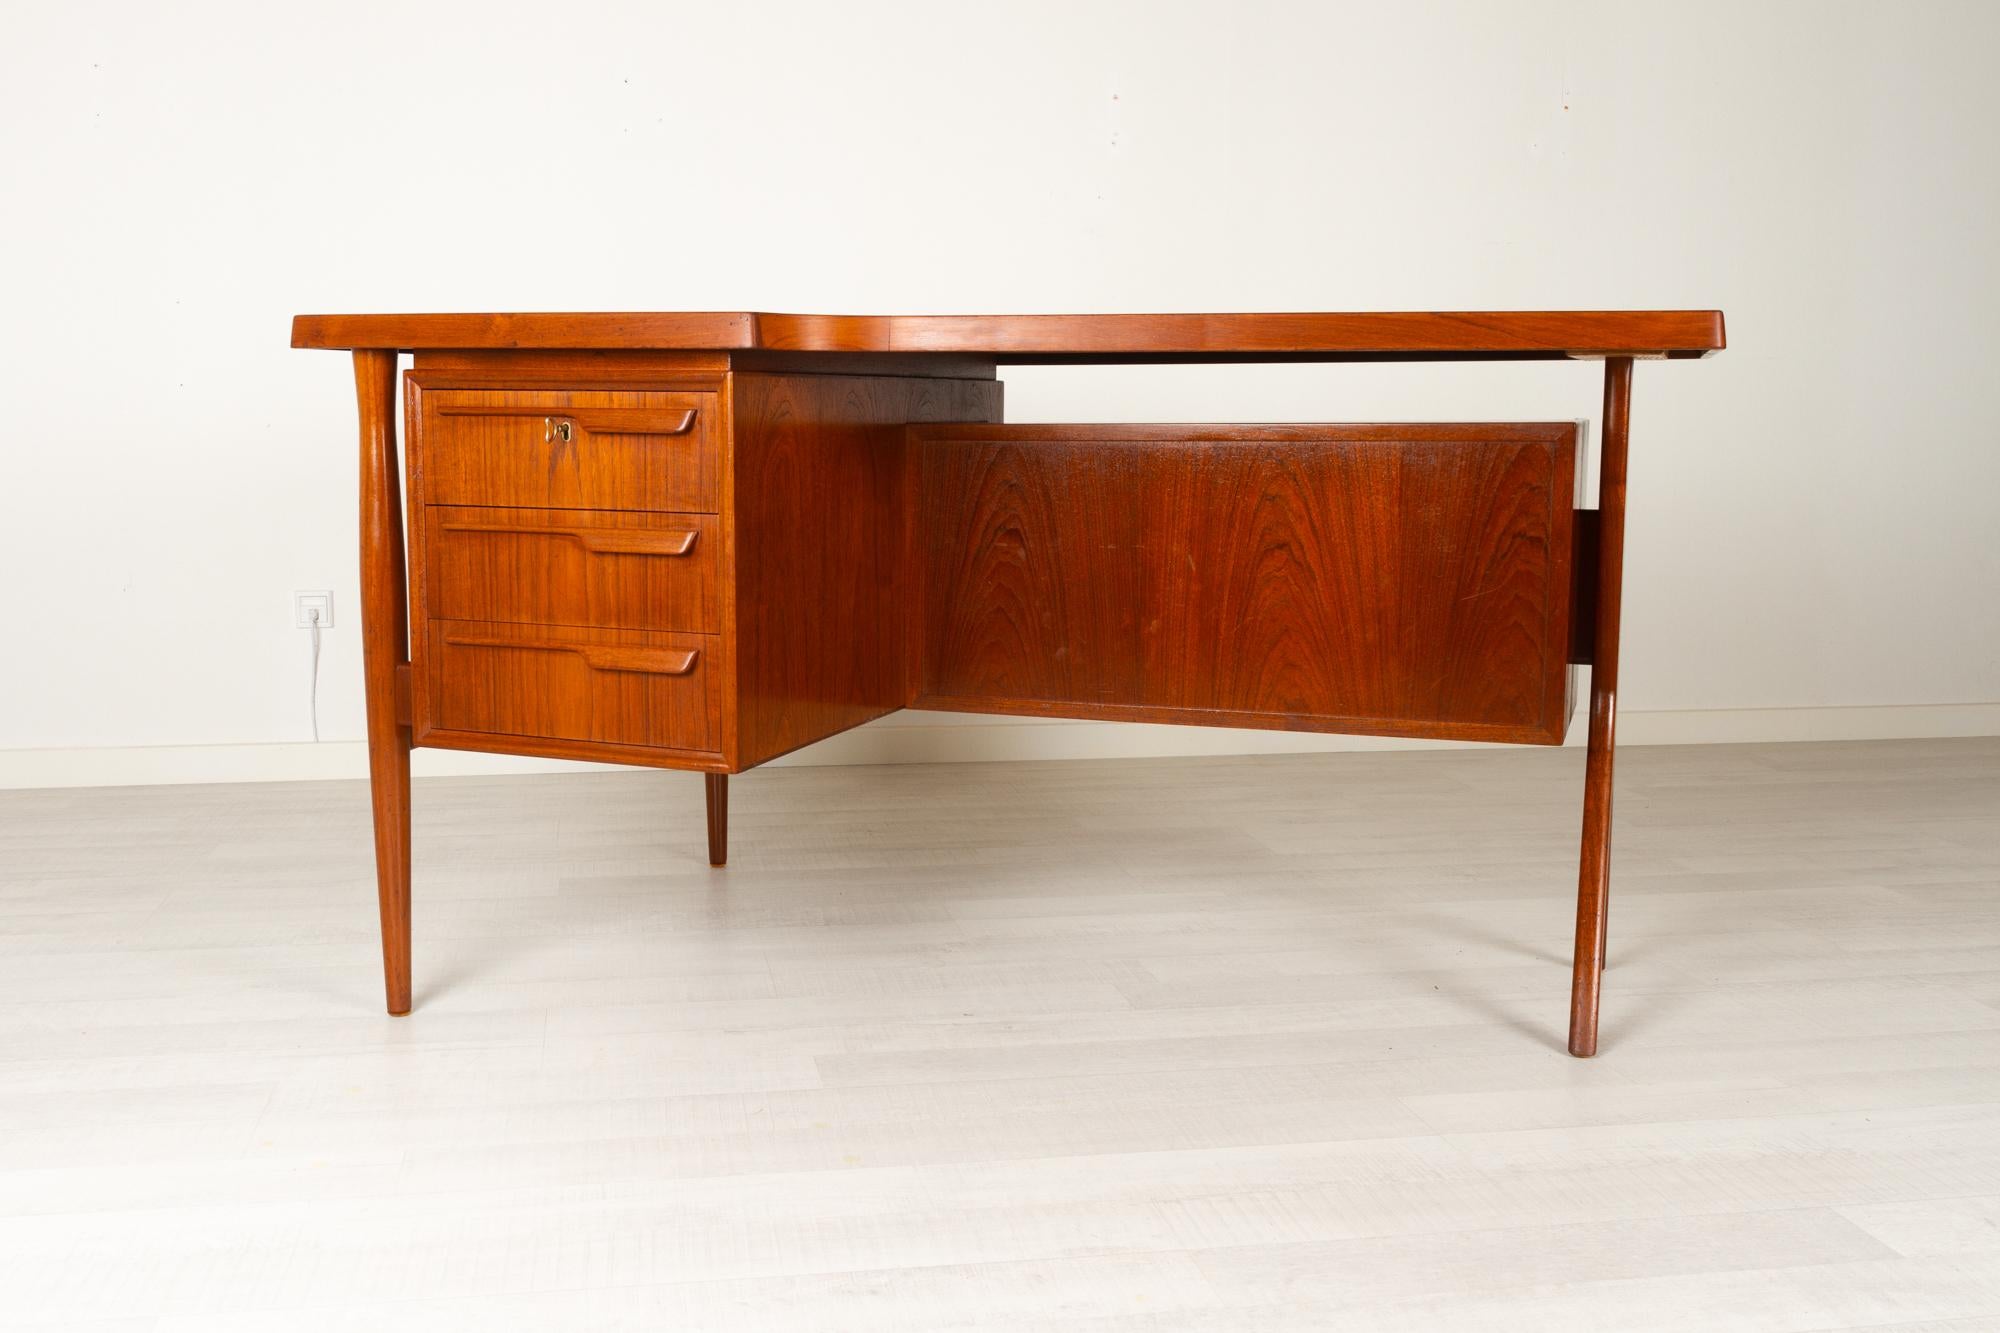 Danish Modern Teak Desk, 1960s
Vintage Danish Mid-Century Modern freestanding teak desk with partial floating boomerang shaped table top. Table top has a wide edge in solid teak. Rare model with one Y-shaped leg and two round tapered legs in solid